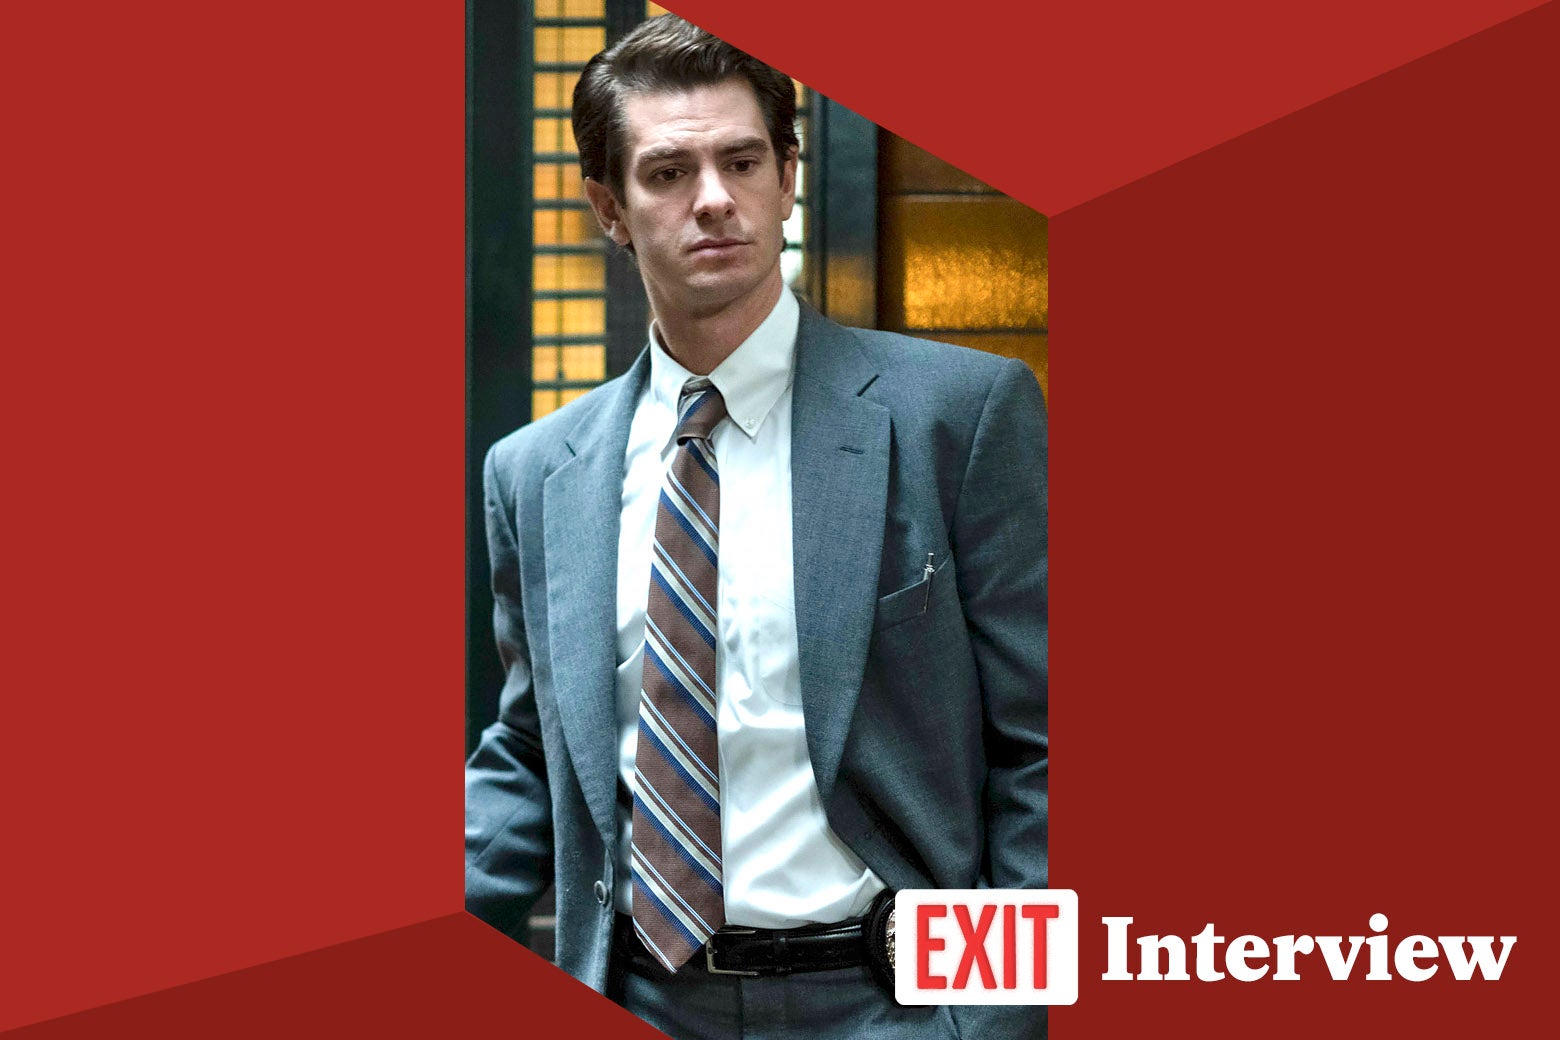 Andrew Garfield in Under the Banner of Heaven, with text that says, "Exit Interview" on the corner of the image.